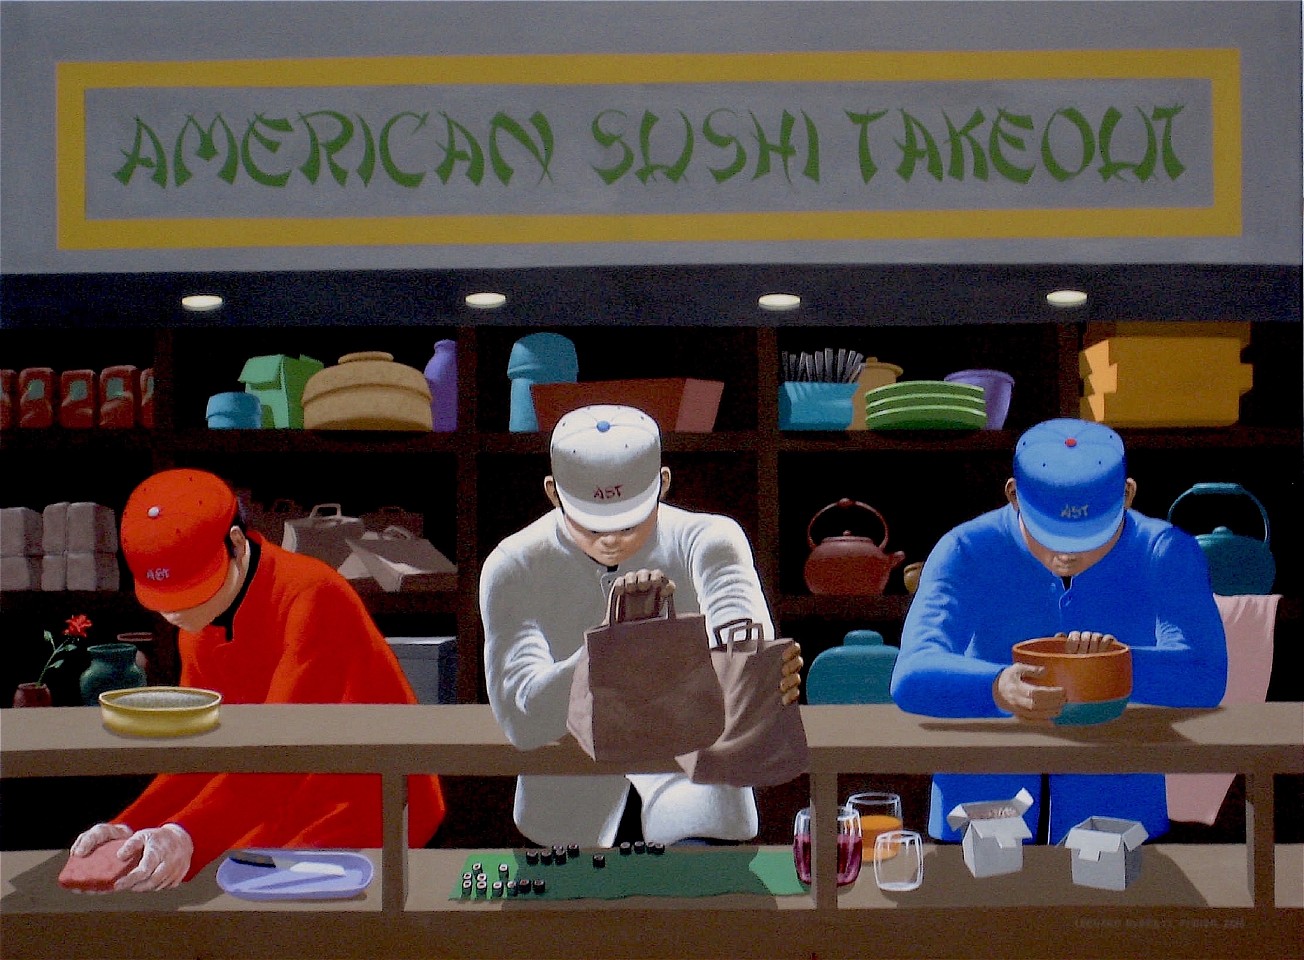 Leonard Everett Fisher, American Sushi Take Out, 2019
acrylic on canvas, 36 x 48 in. (91.4 x 121.9 cm)
LES190601